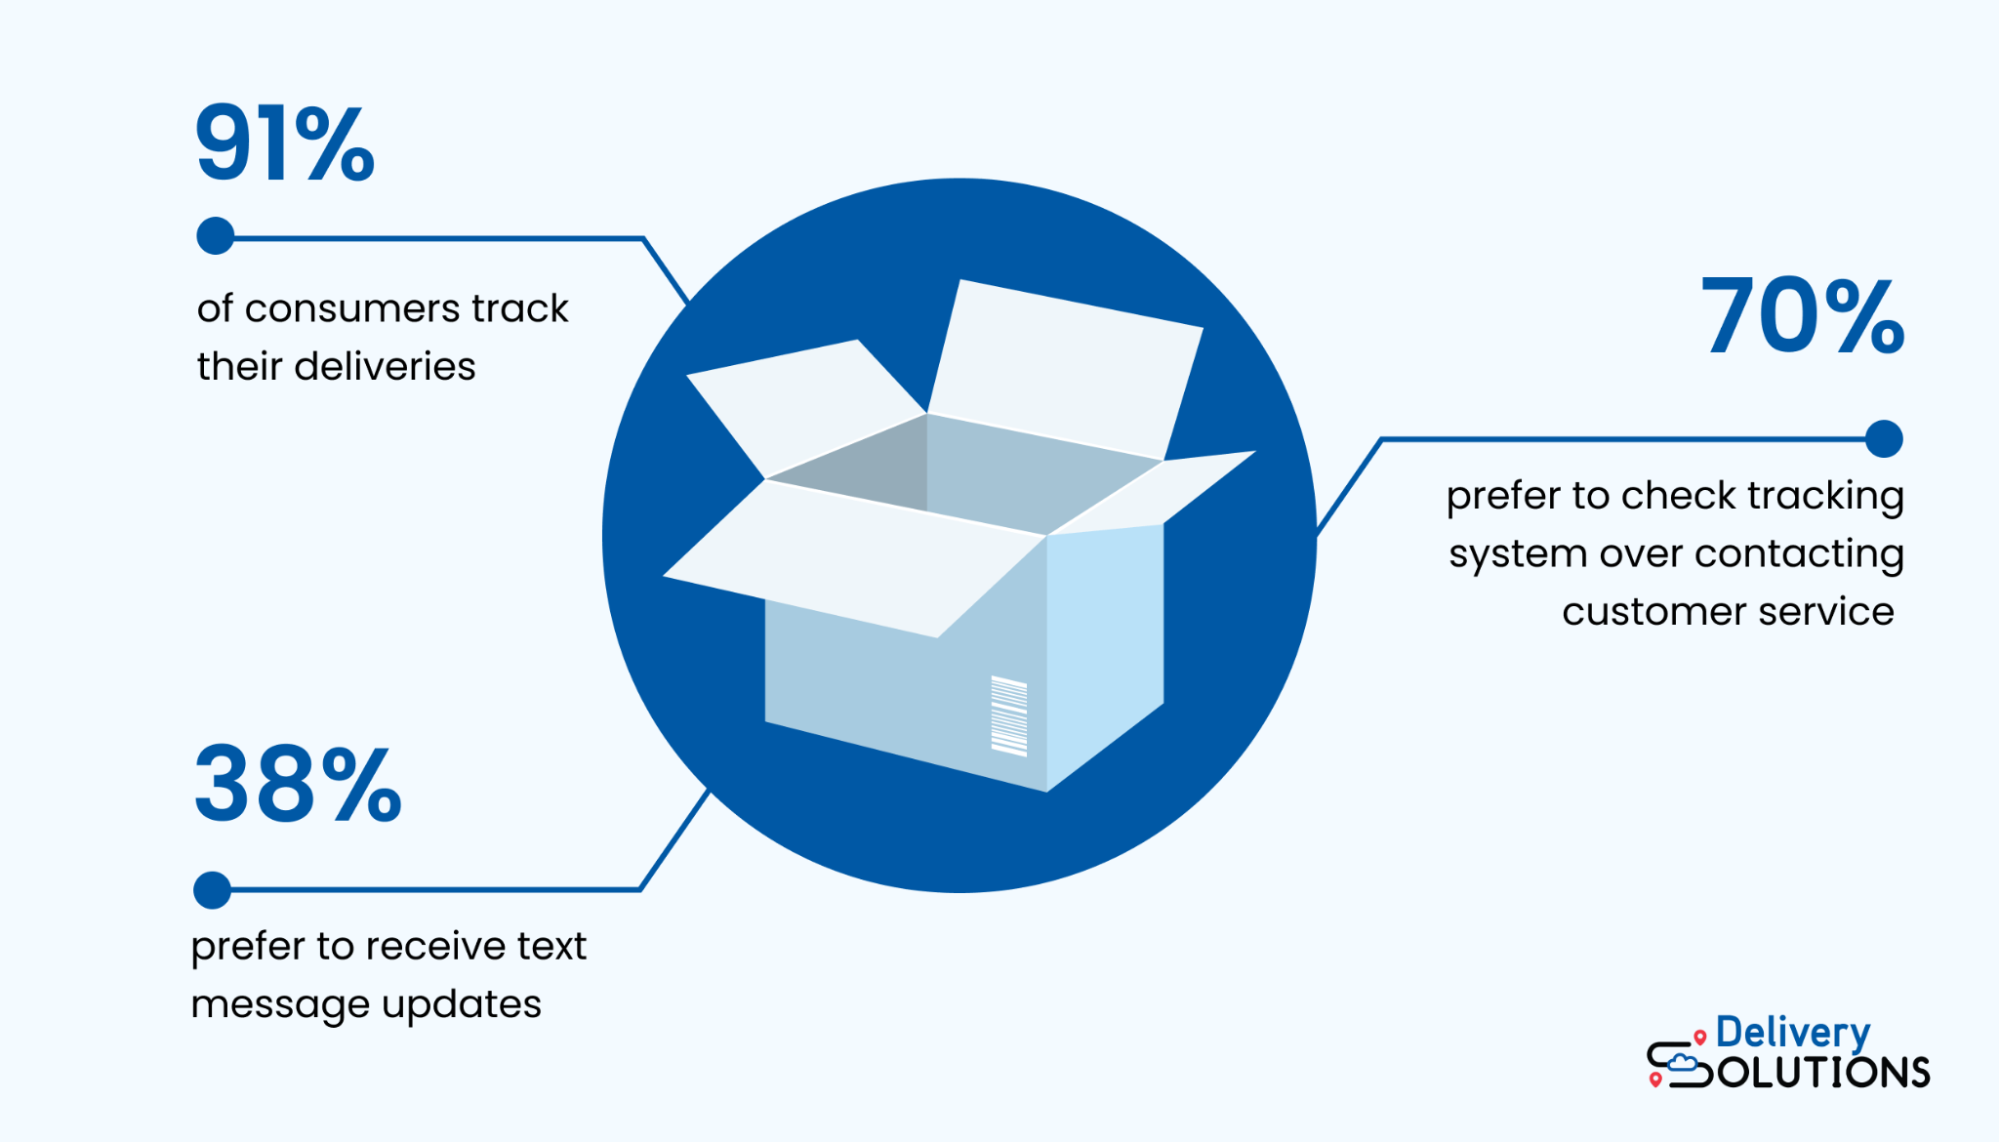 Graphic showing the percentages of consumers who track their deliveries, and the different methods